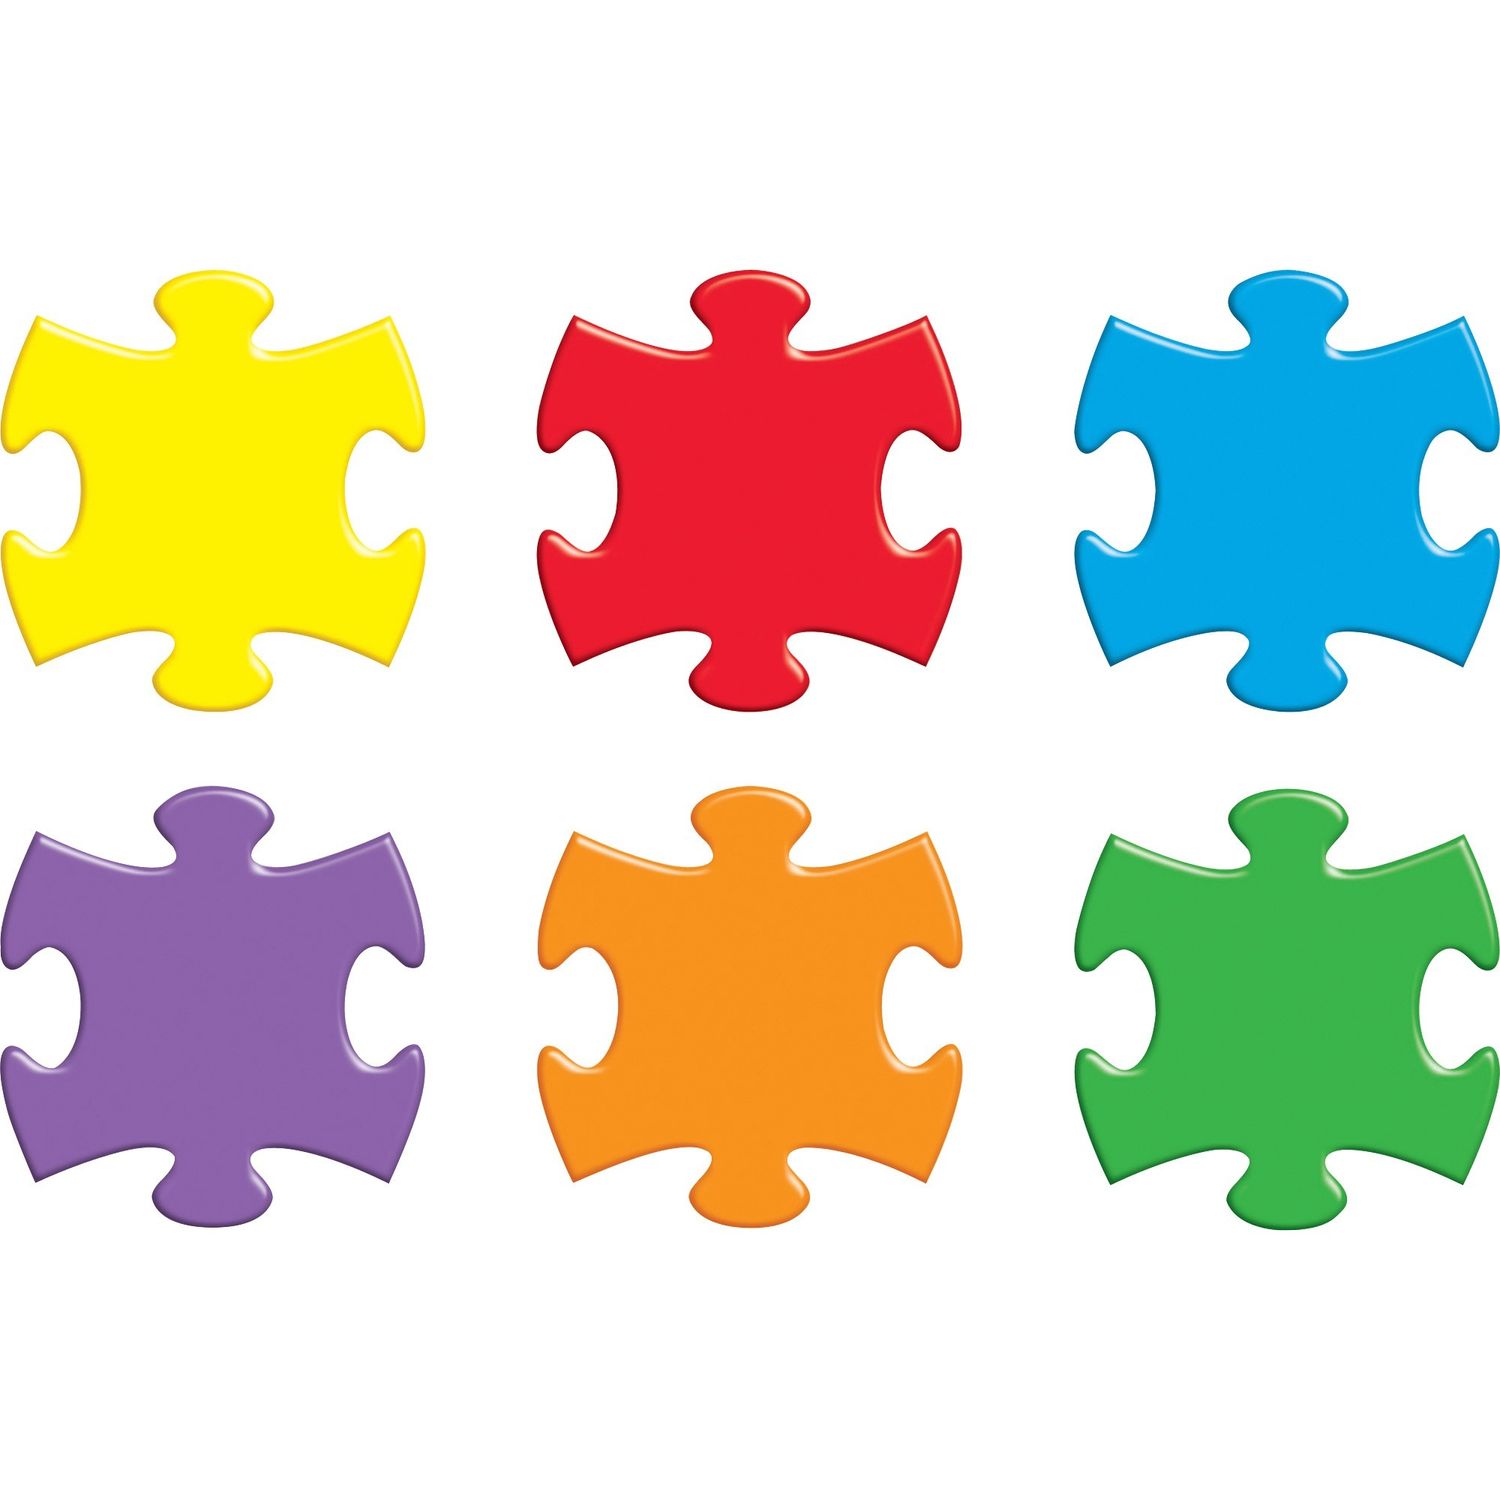 Accents Interlocking Puzzle 5.50", Theme/Subject: Learning, 6-10 Year36 Piece